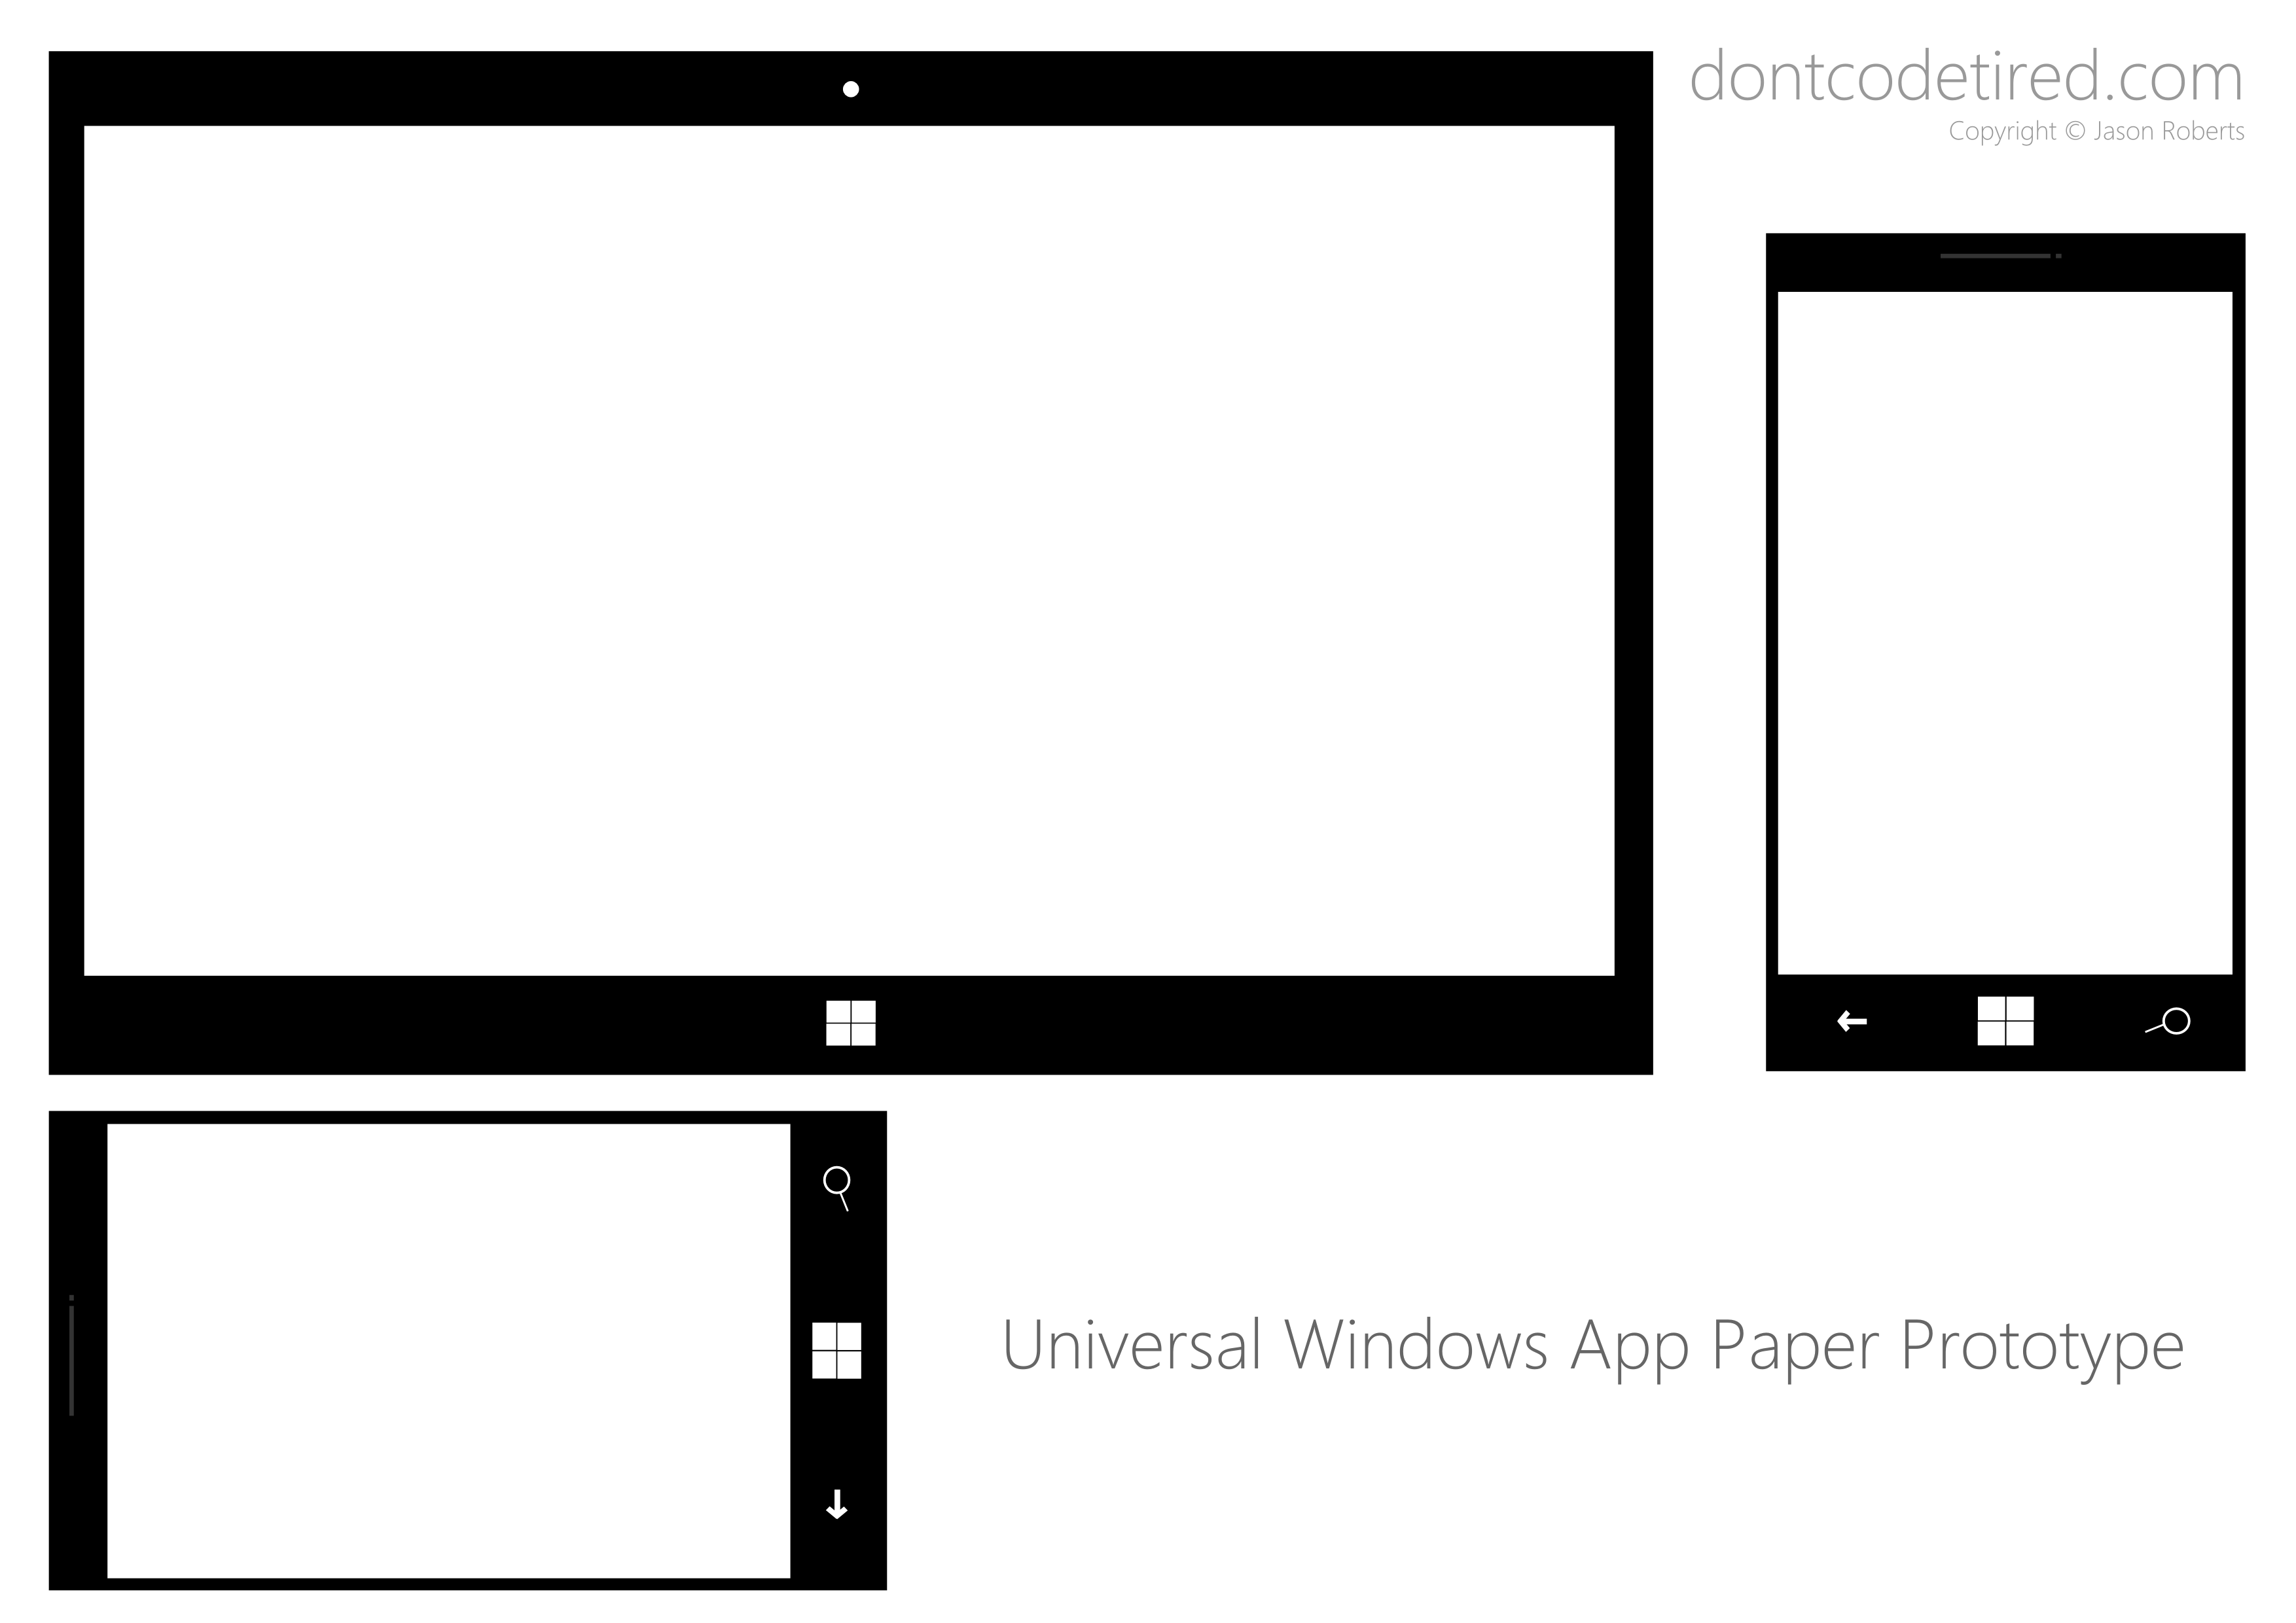 Universal Windows Apps Paper Protoype template